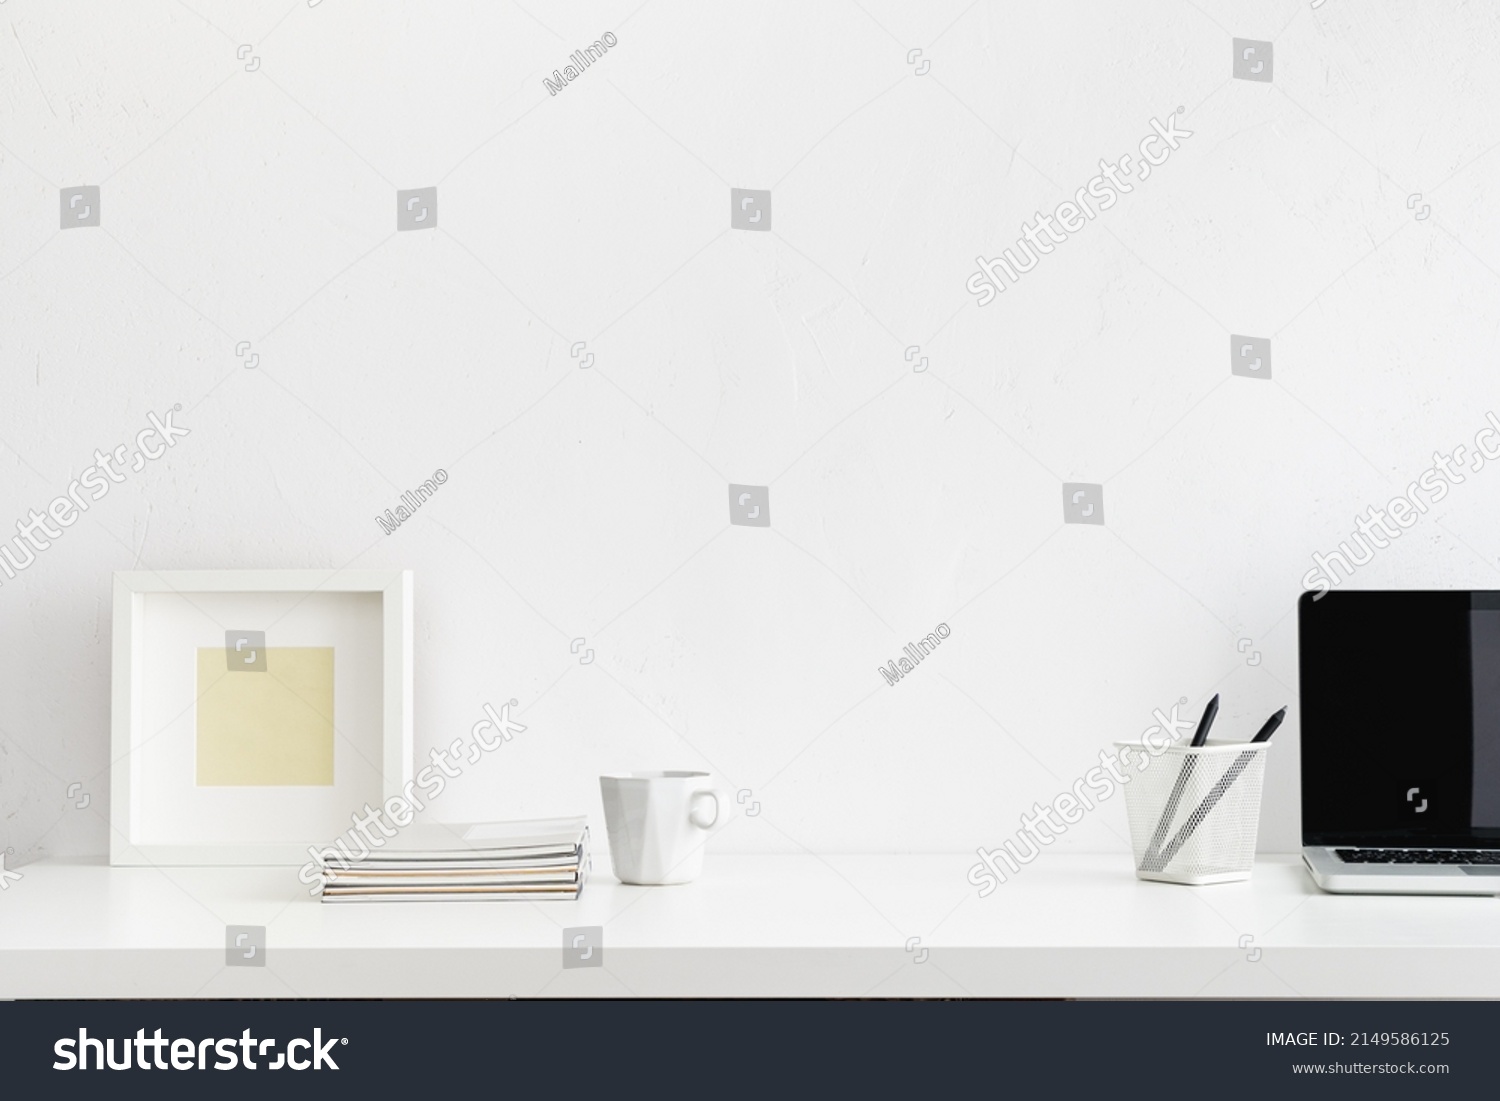 Simple Home Office Desk White Supplies Stock Photo 2149586125 ...